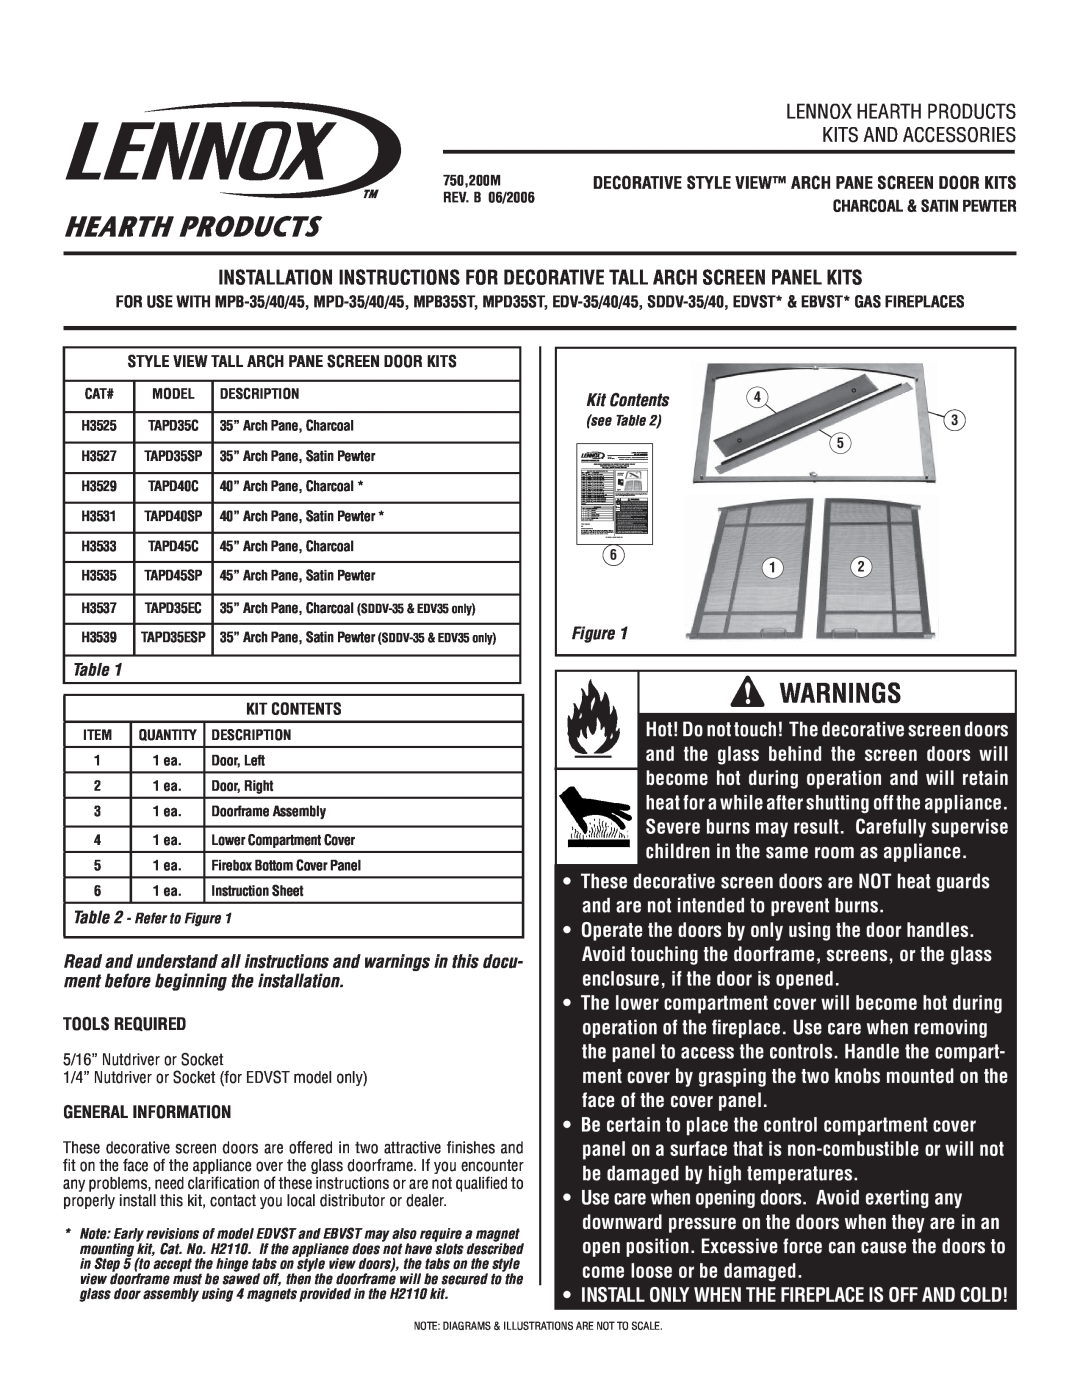 Lennox Hearth TAPD35SP, TAPD45SP instruction sheet Kit Contents, Warnings, Lennox Hearth Products, Kits And Accessories 